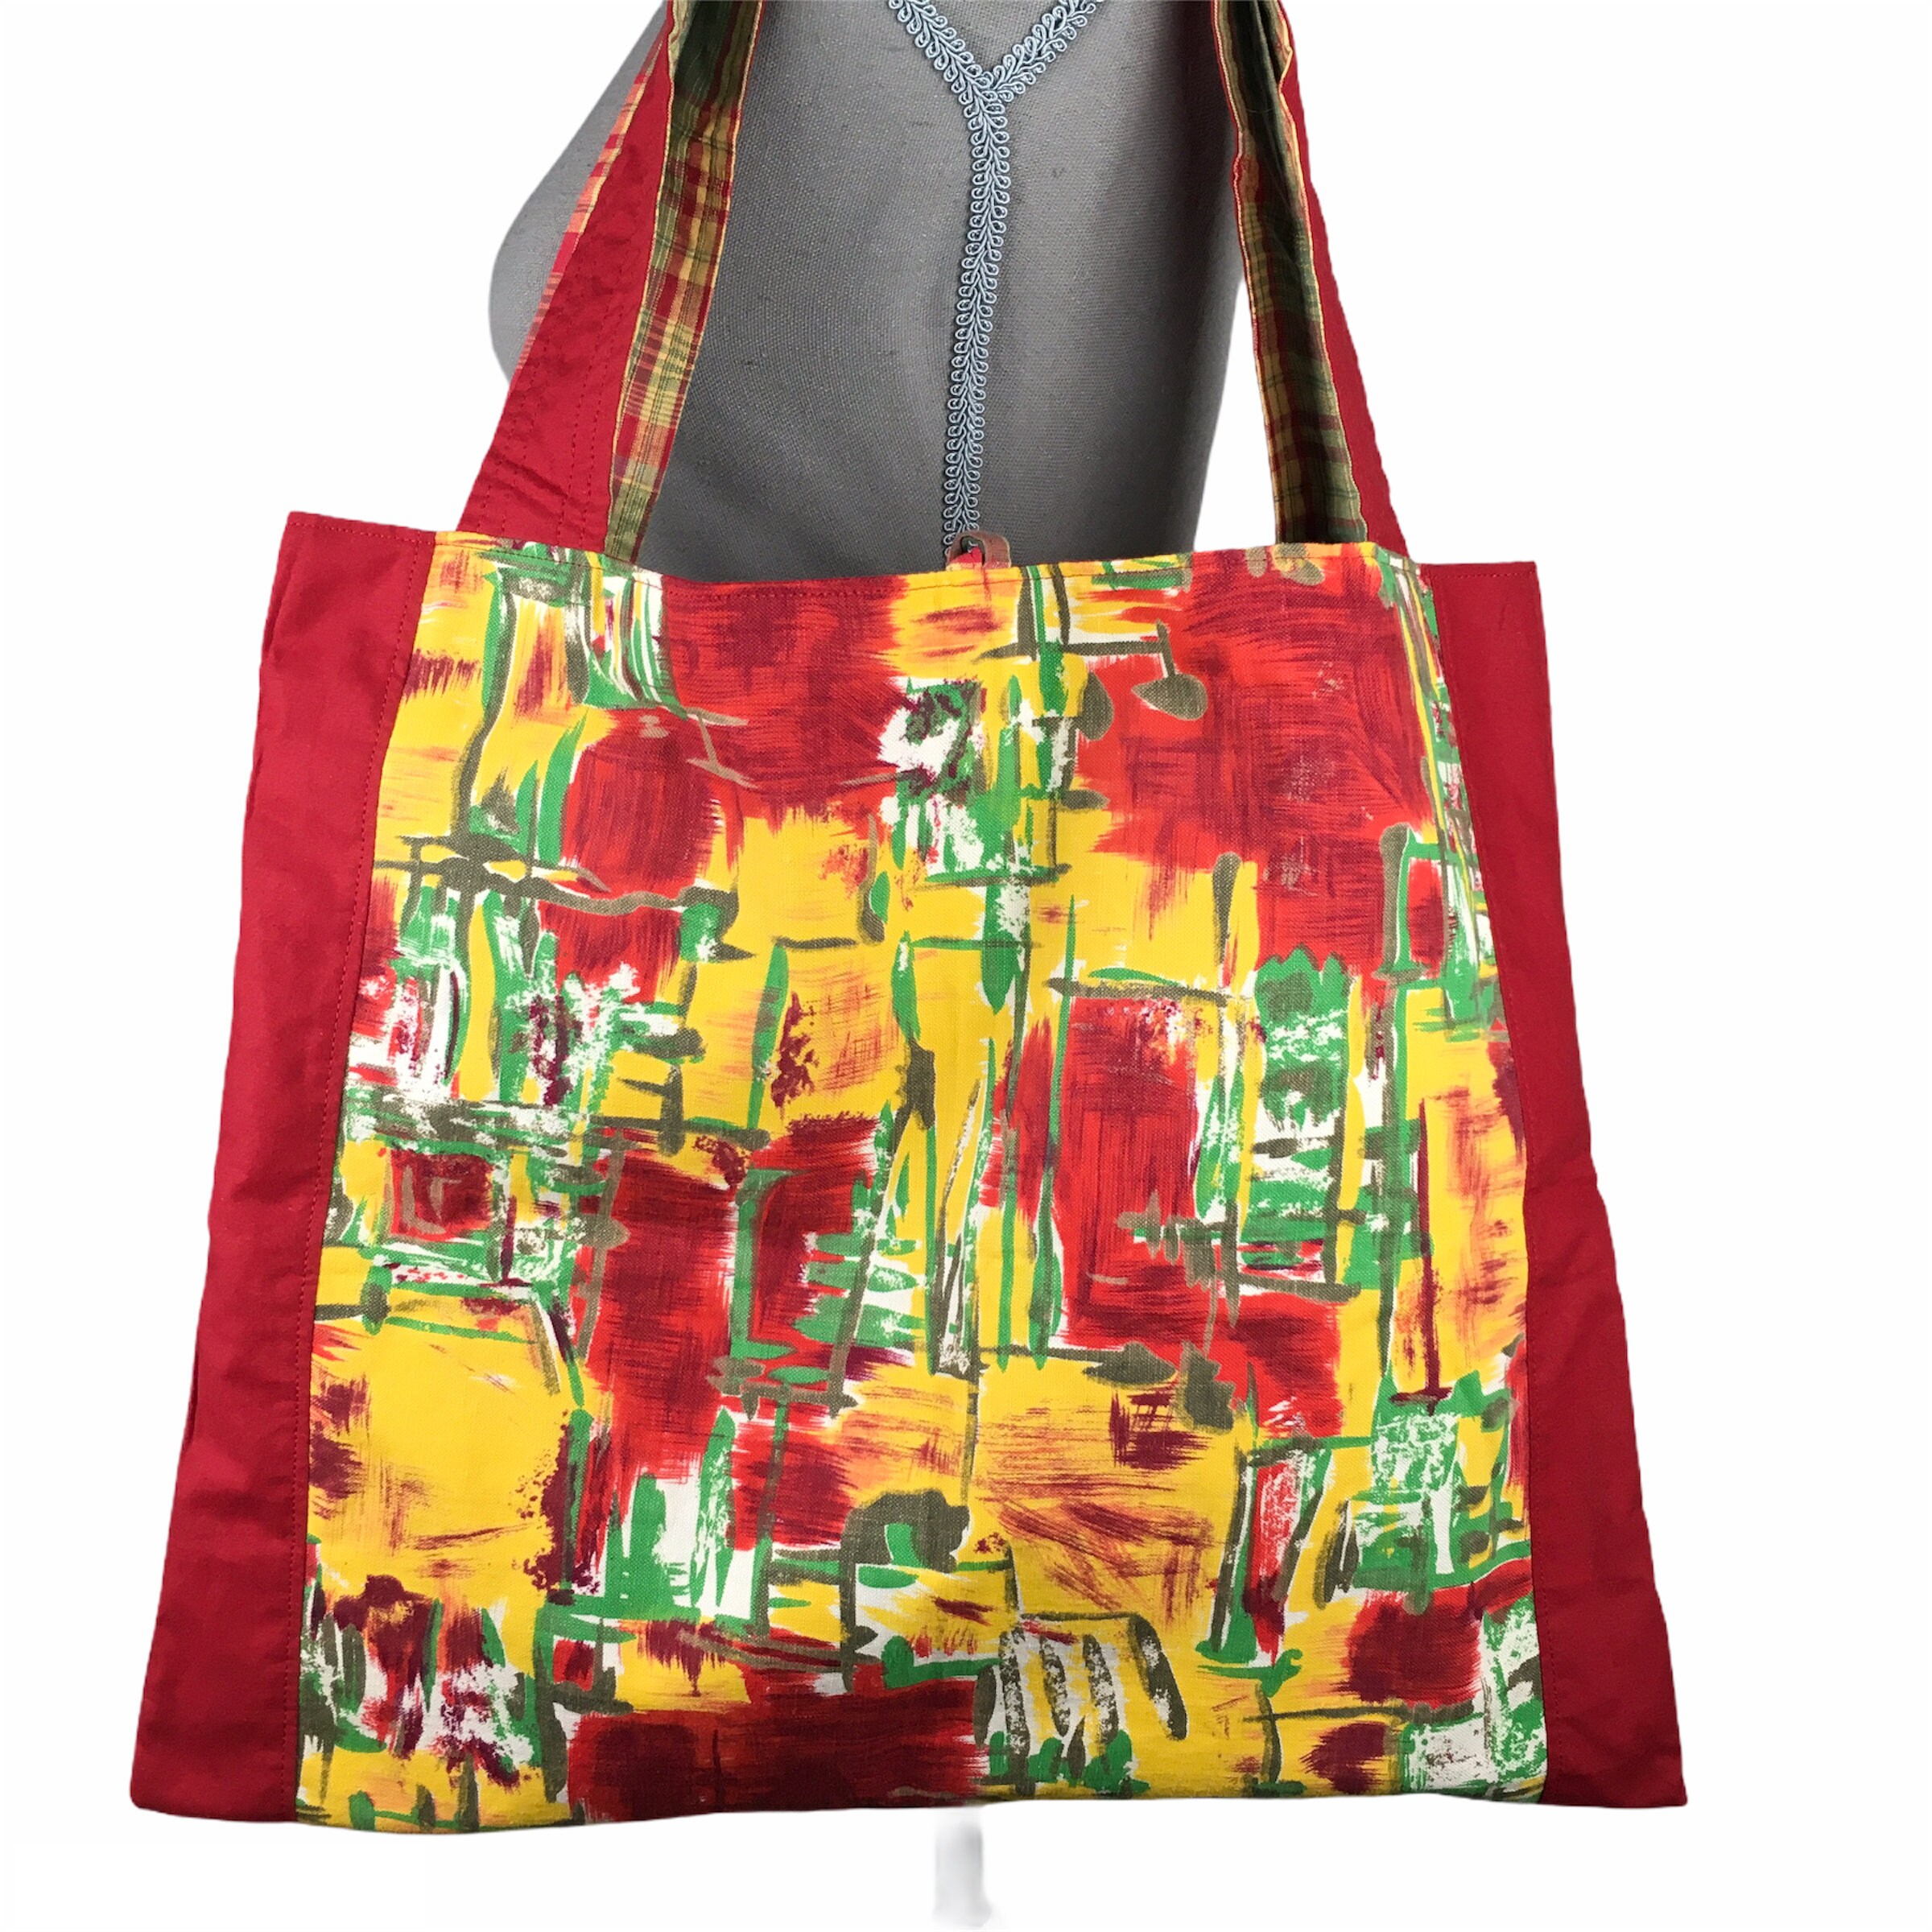 Reversible Lined Tote Bag for Women Vintage Canvas 1950s 